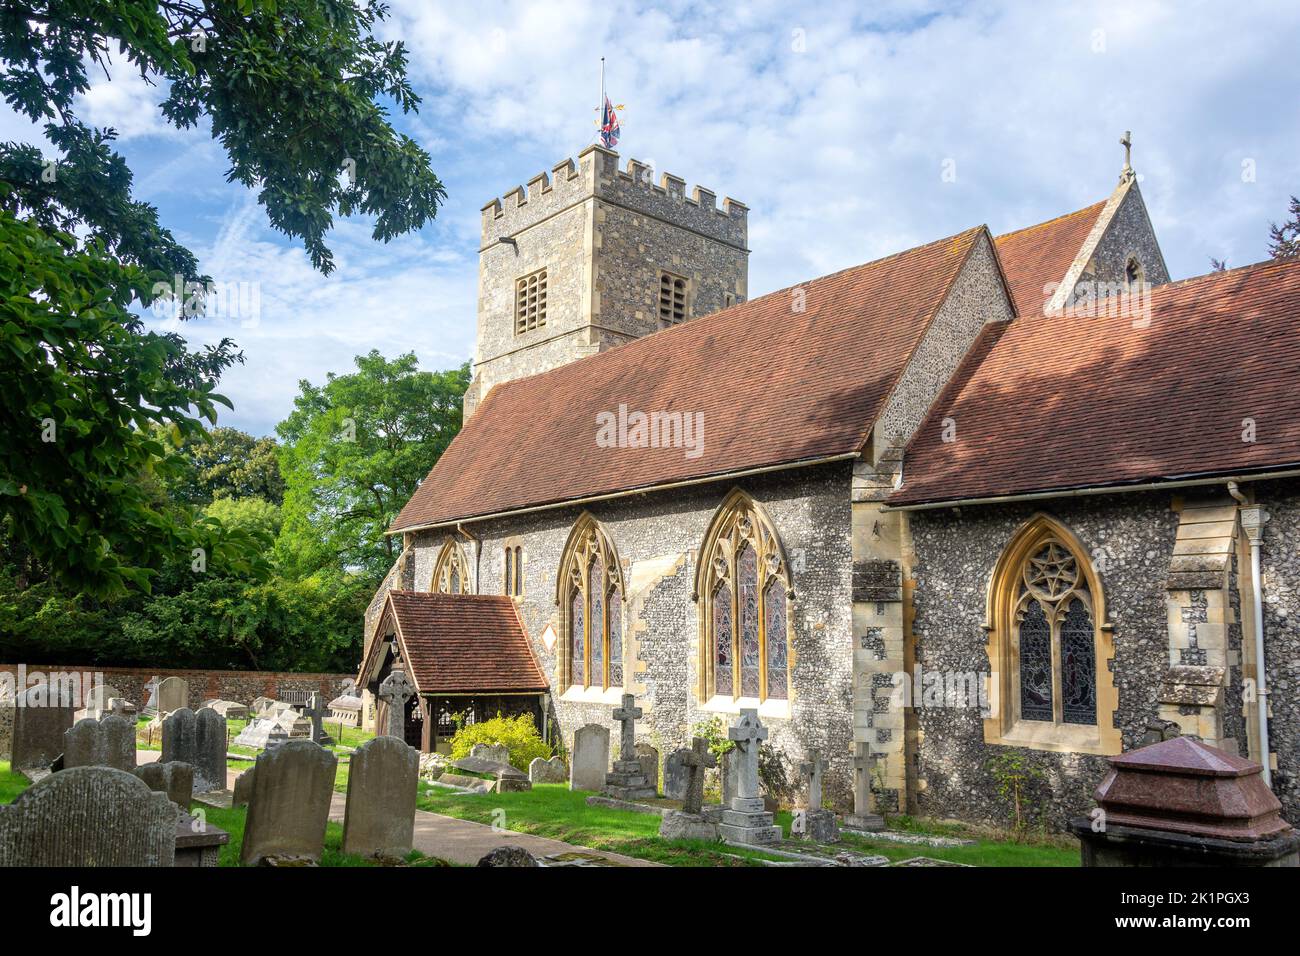 Eglise St Andrew, Sonning, Berkshire, Angleterre, Royaume-Uni Banque D'Images